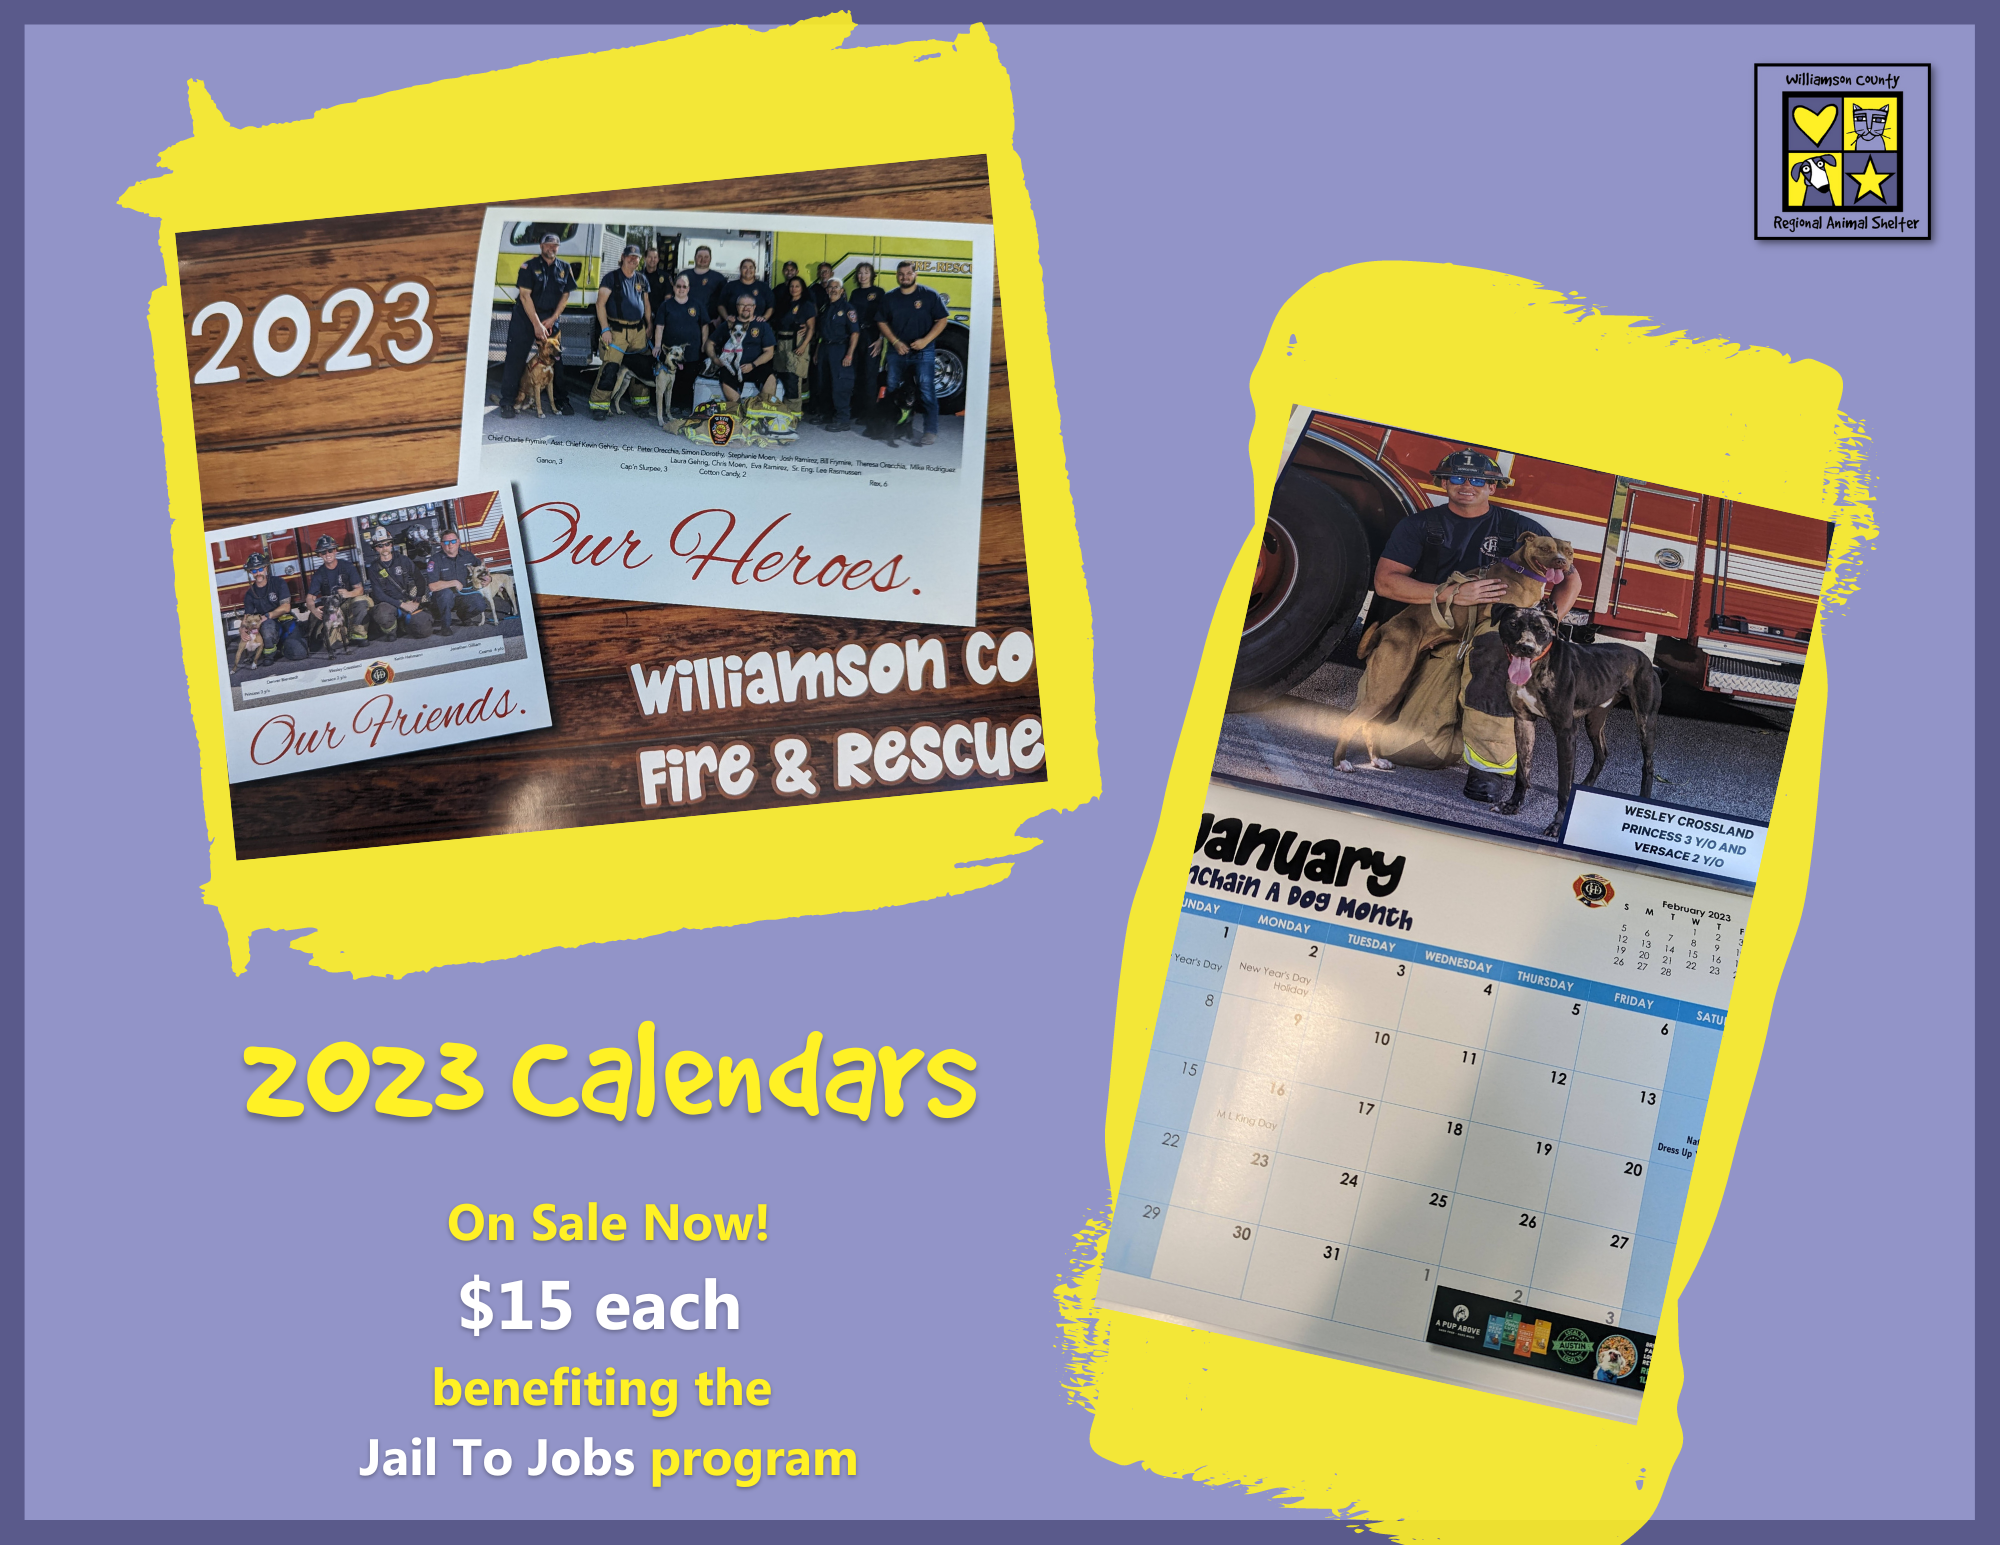 Purple graphic with photos of 2023 calendar for sale for $15